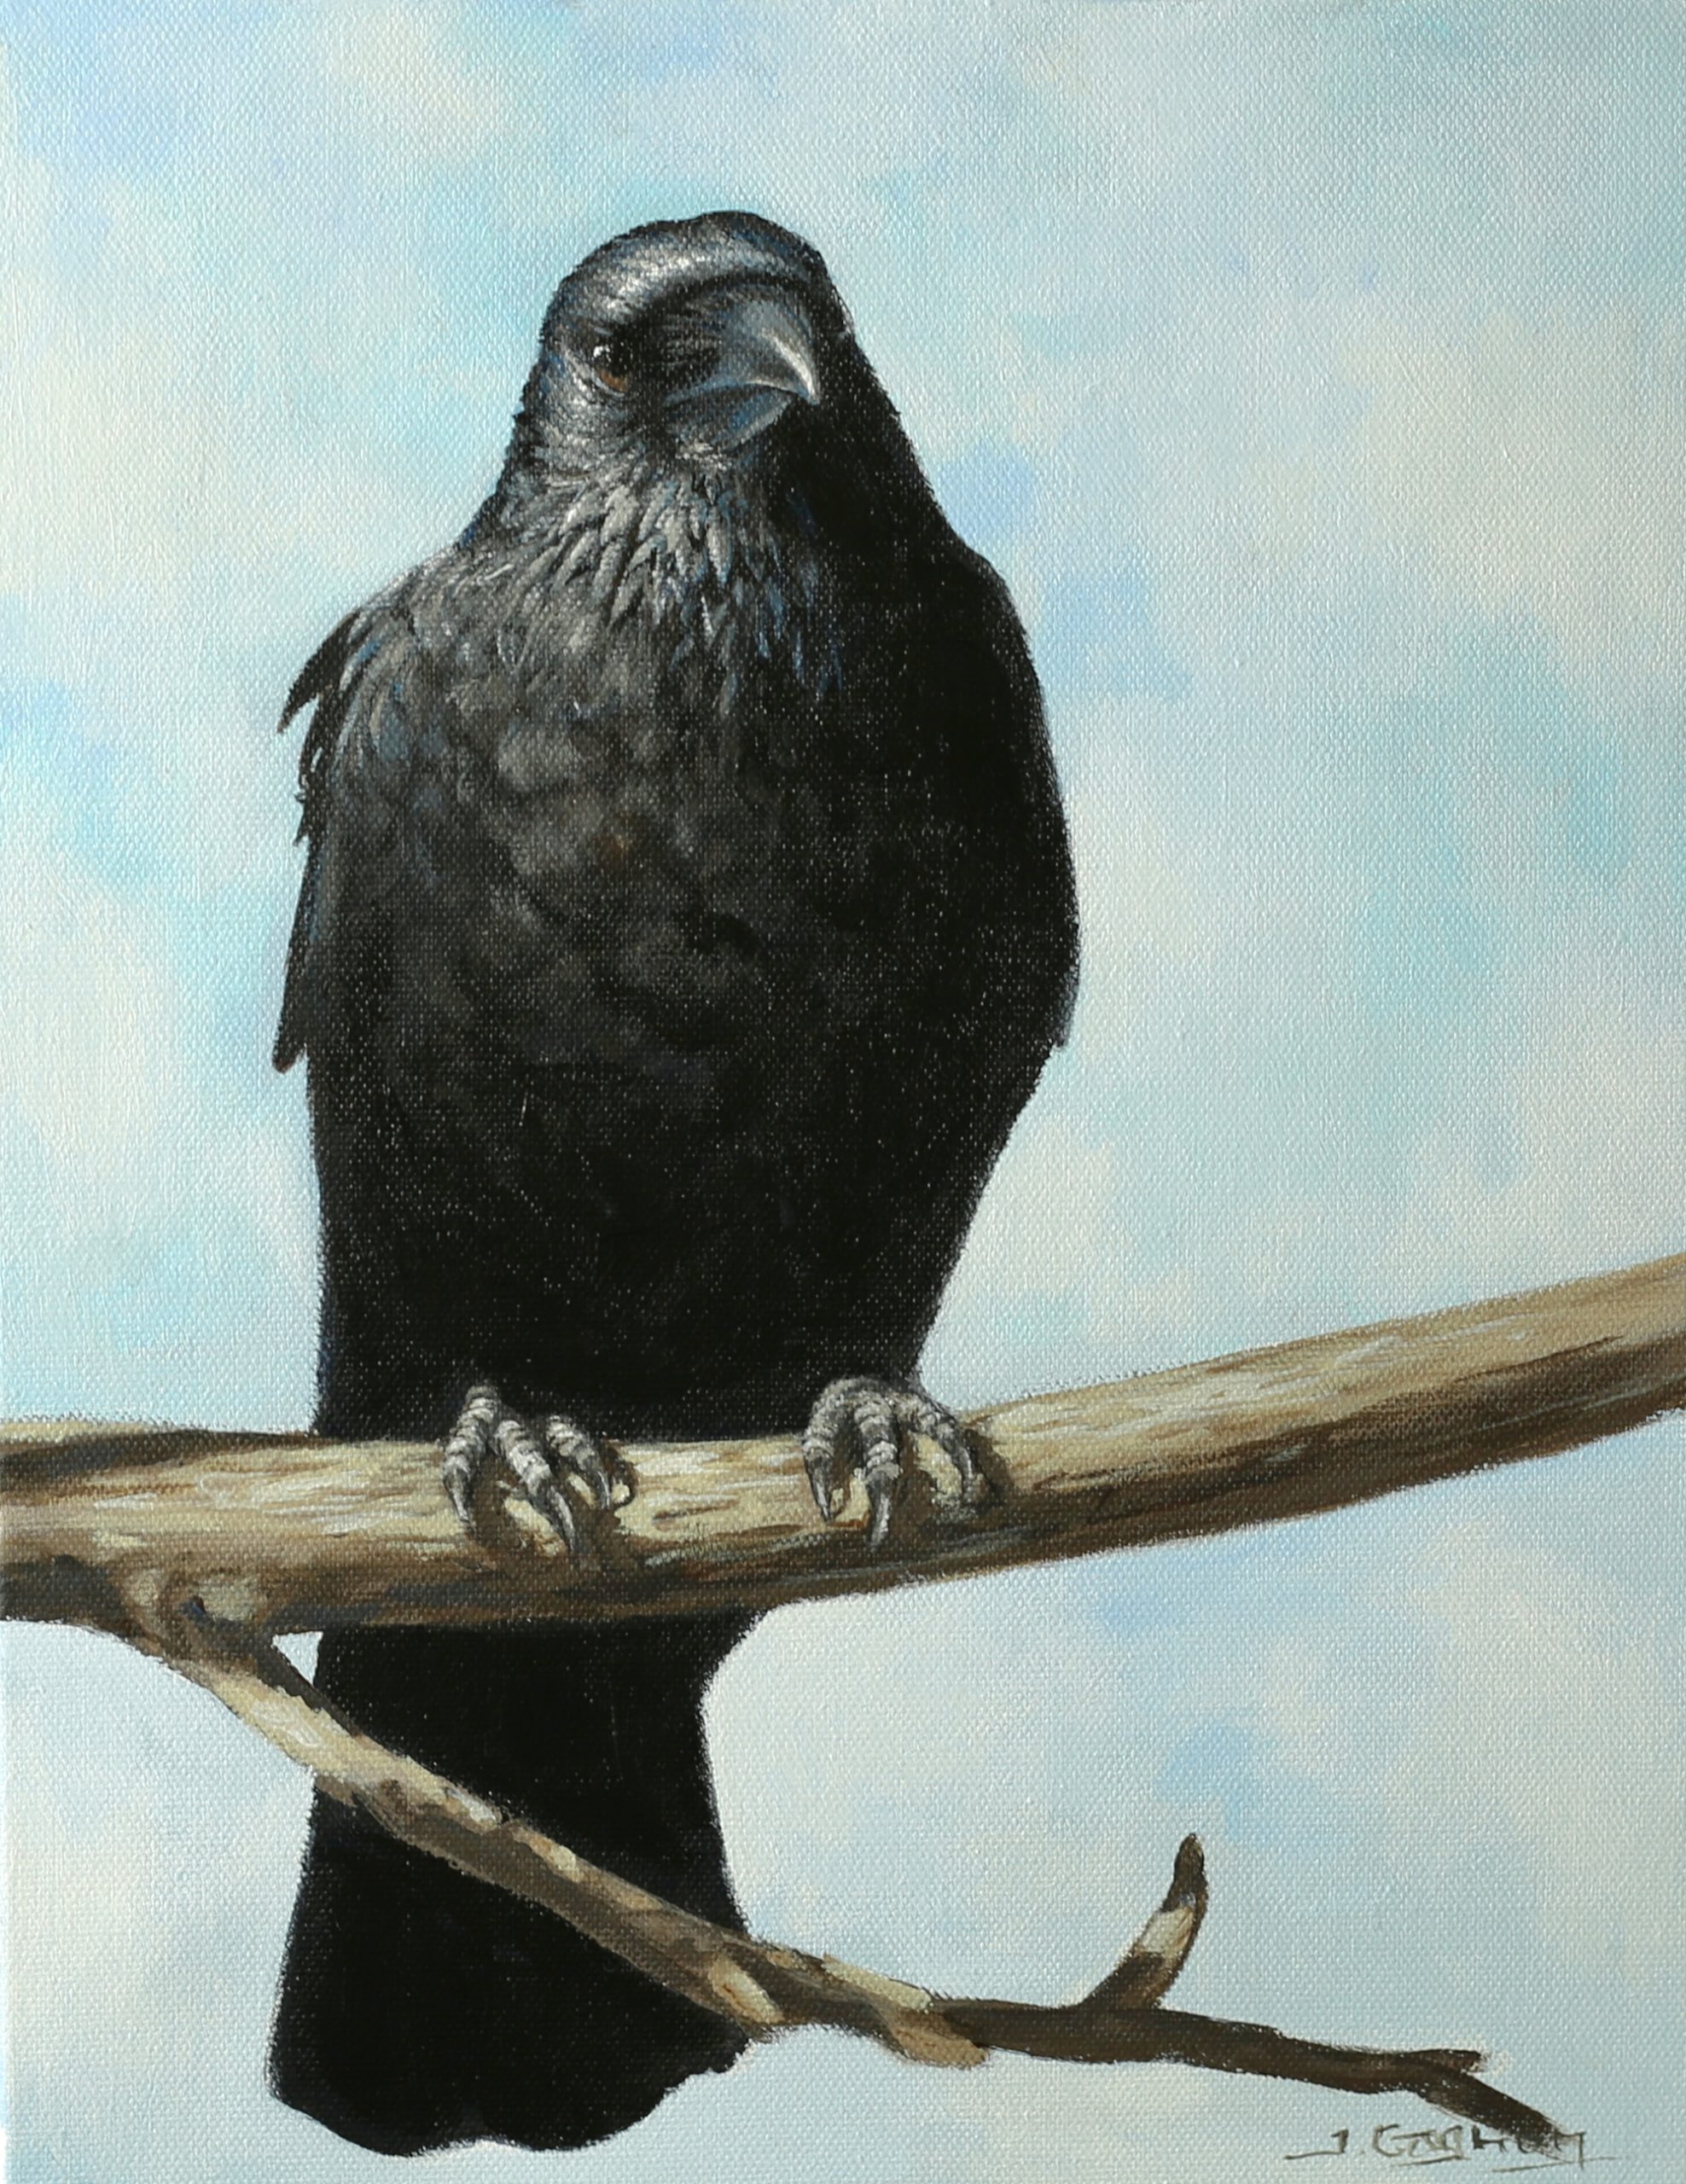 The Curious Raven – An Acrylic Painting Lesson